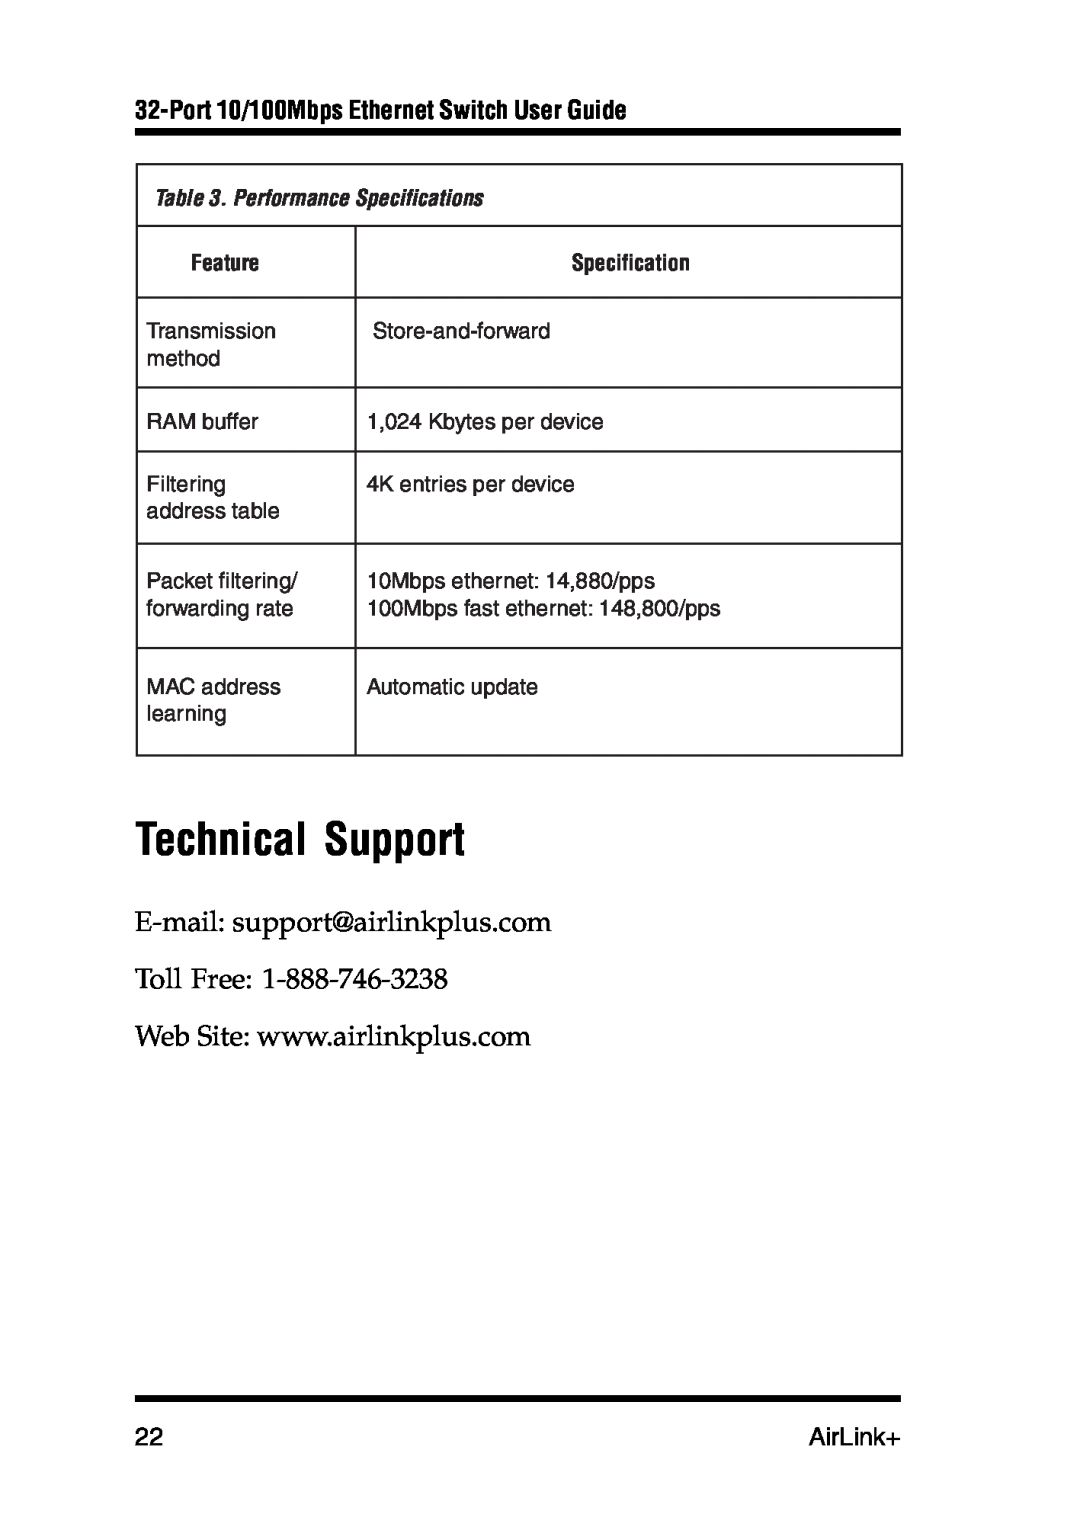 Airlink UG-ASW232-1103 Technical Support, Port 10/100Mbps Ethernet Switch User Guide, AirLink+, Performance Specifications 